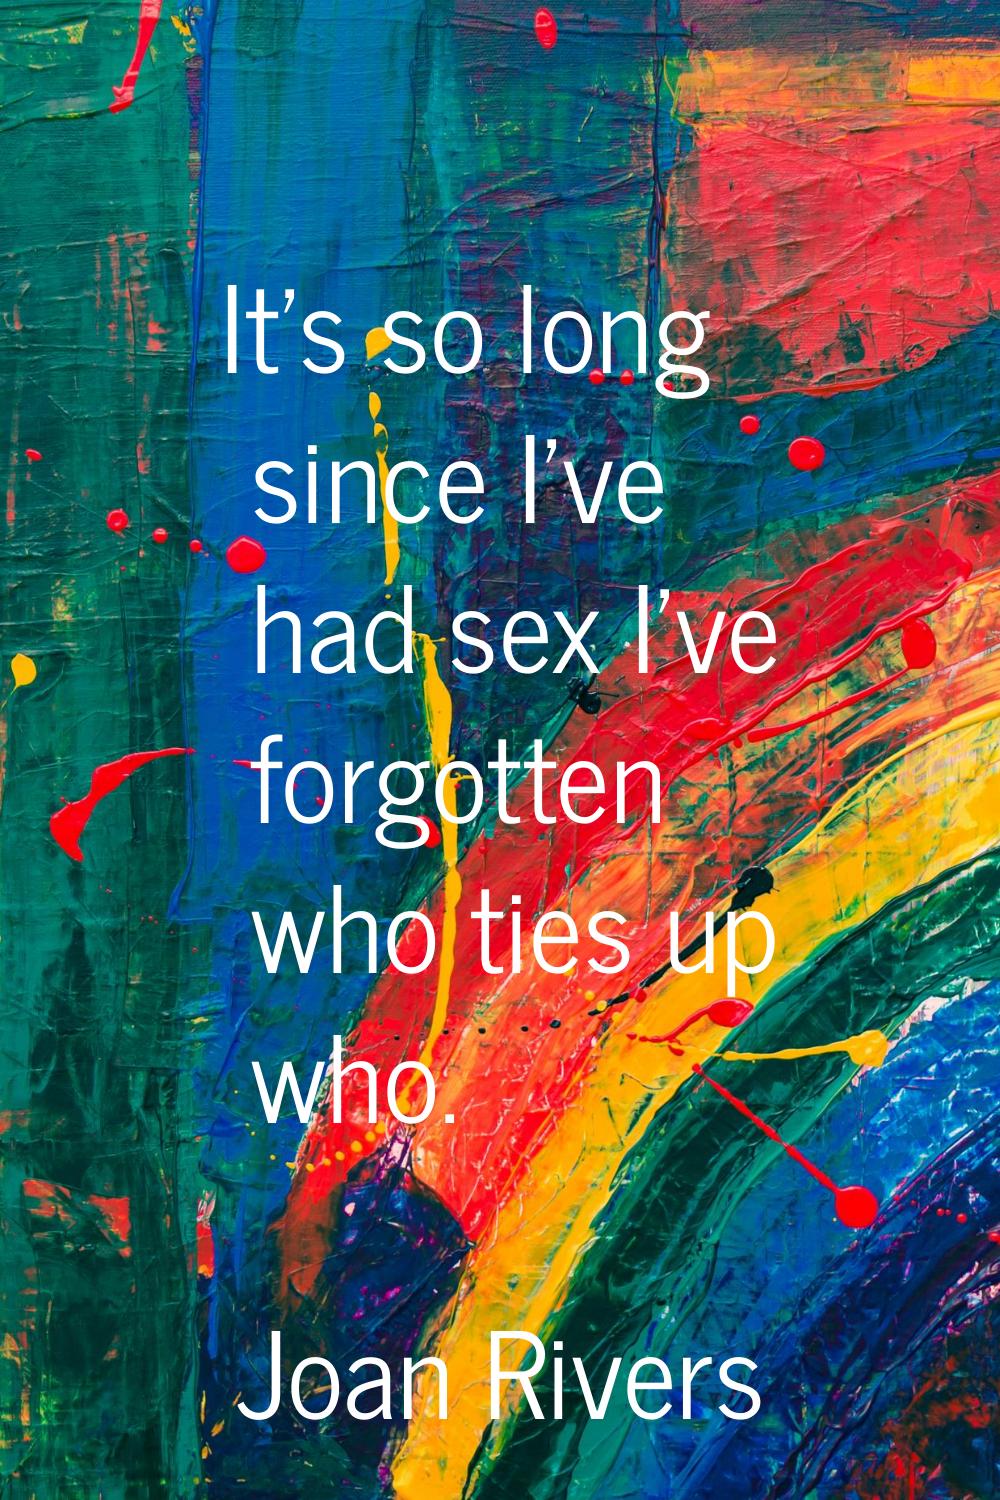 It's so long since I've had sex I've forgotten who ties up who.